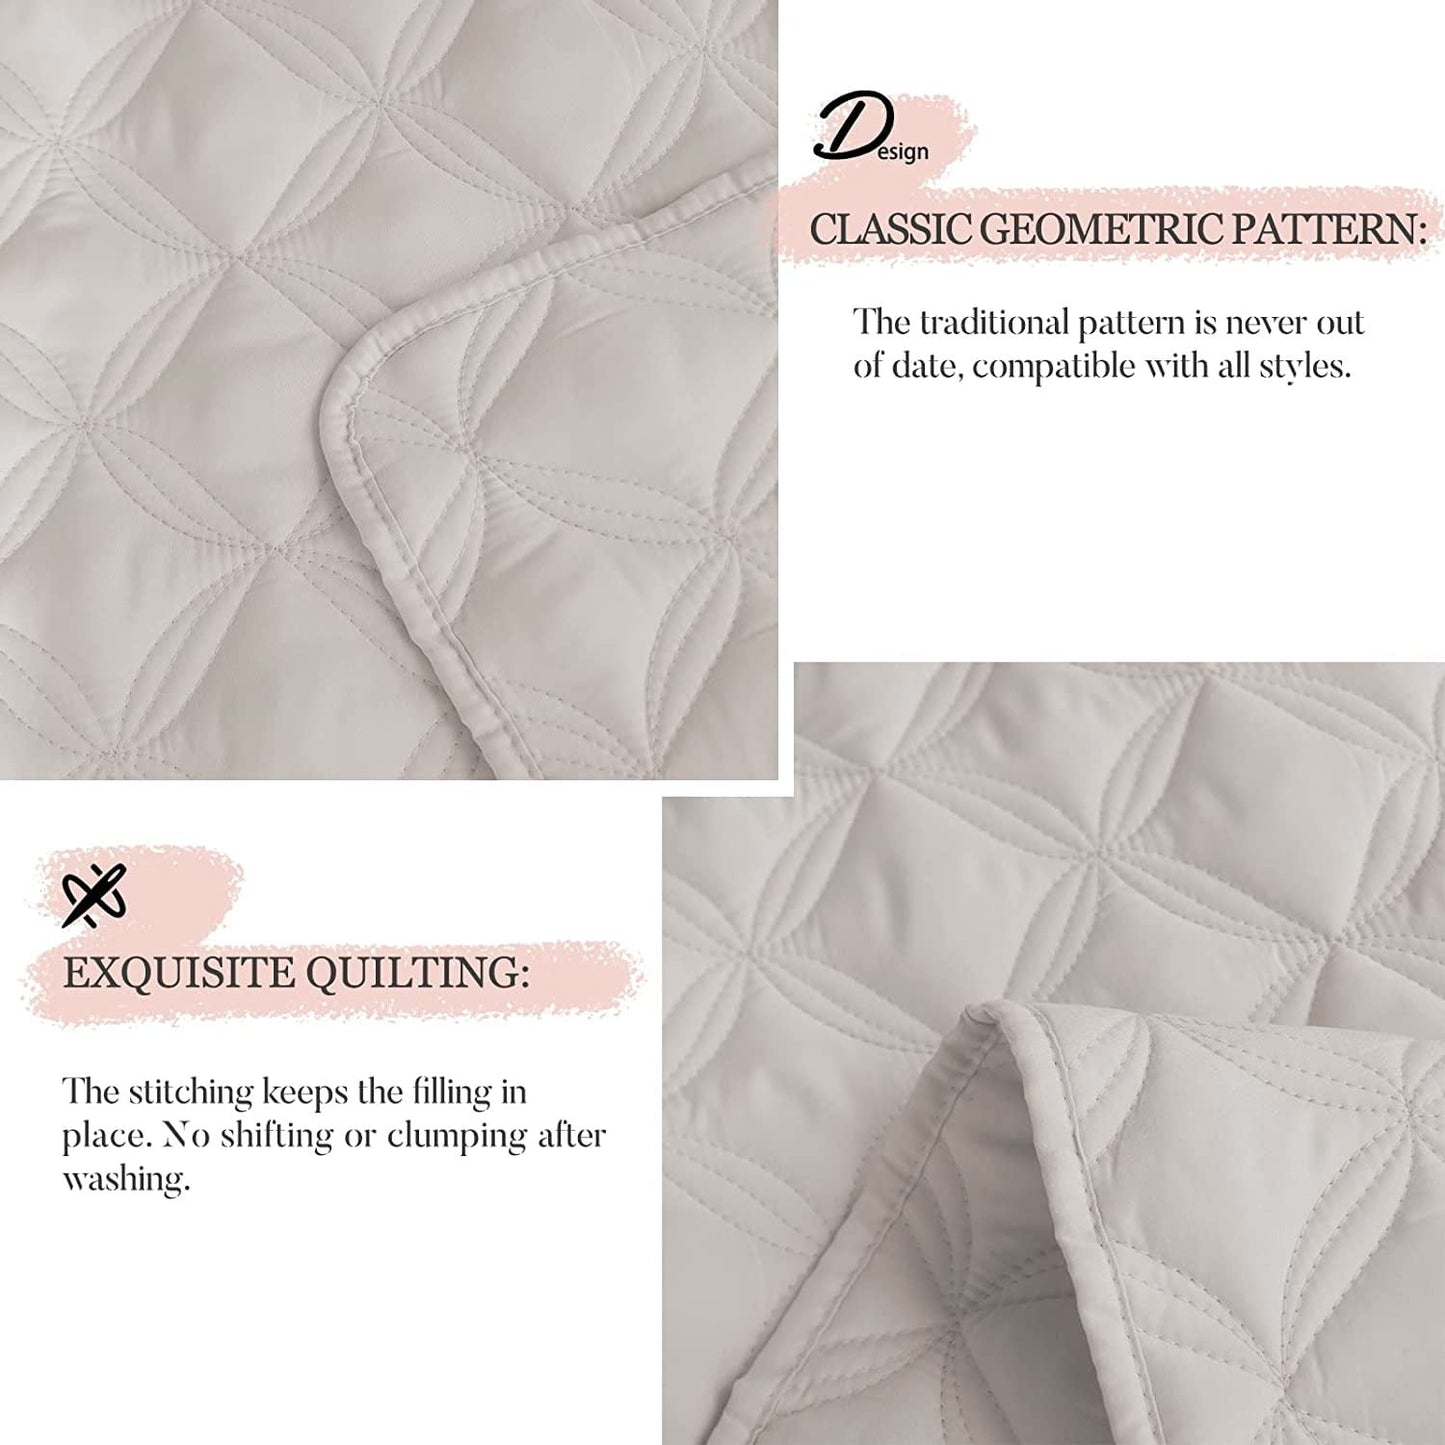 Exclusivo Mezcla Bed Quilt Set King Size for All Season, Stitched Pattern Quilted Bedspread/ Bedding Set/ Coverlet with 2 Pillow shams, Lightweight and Soft, Bone